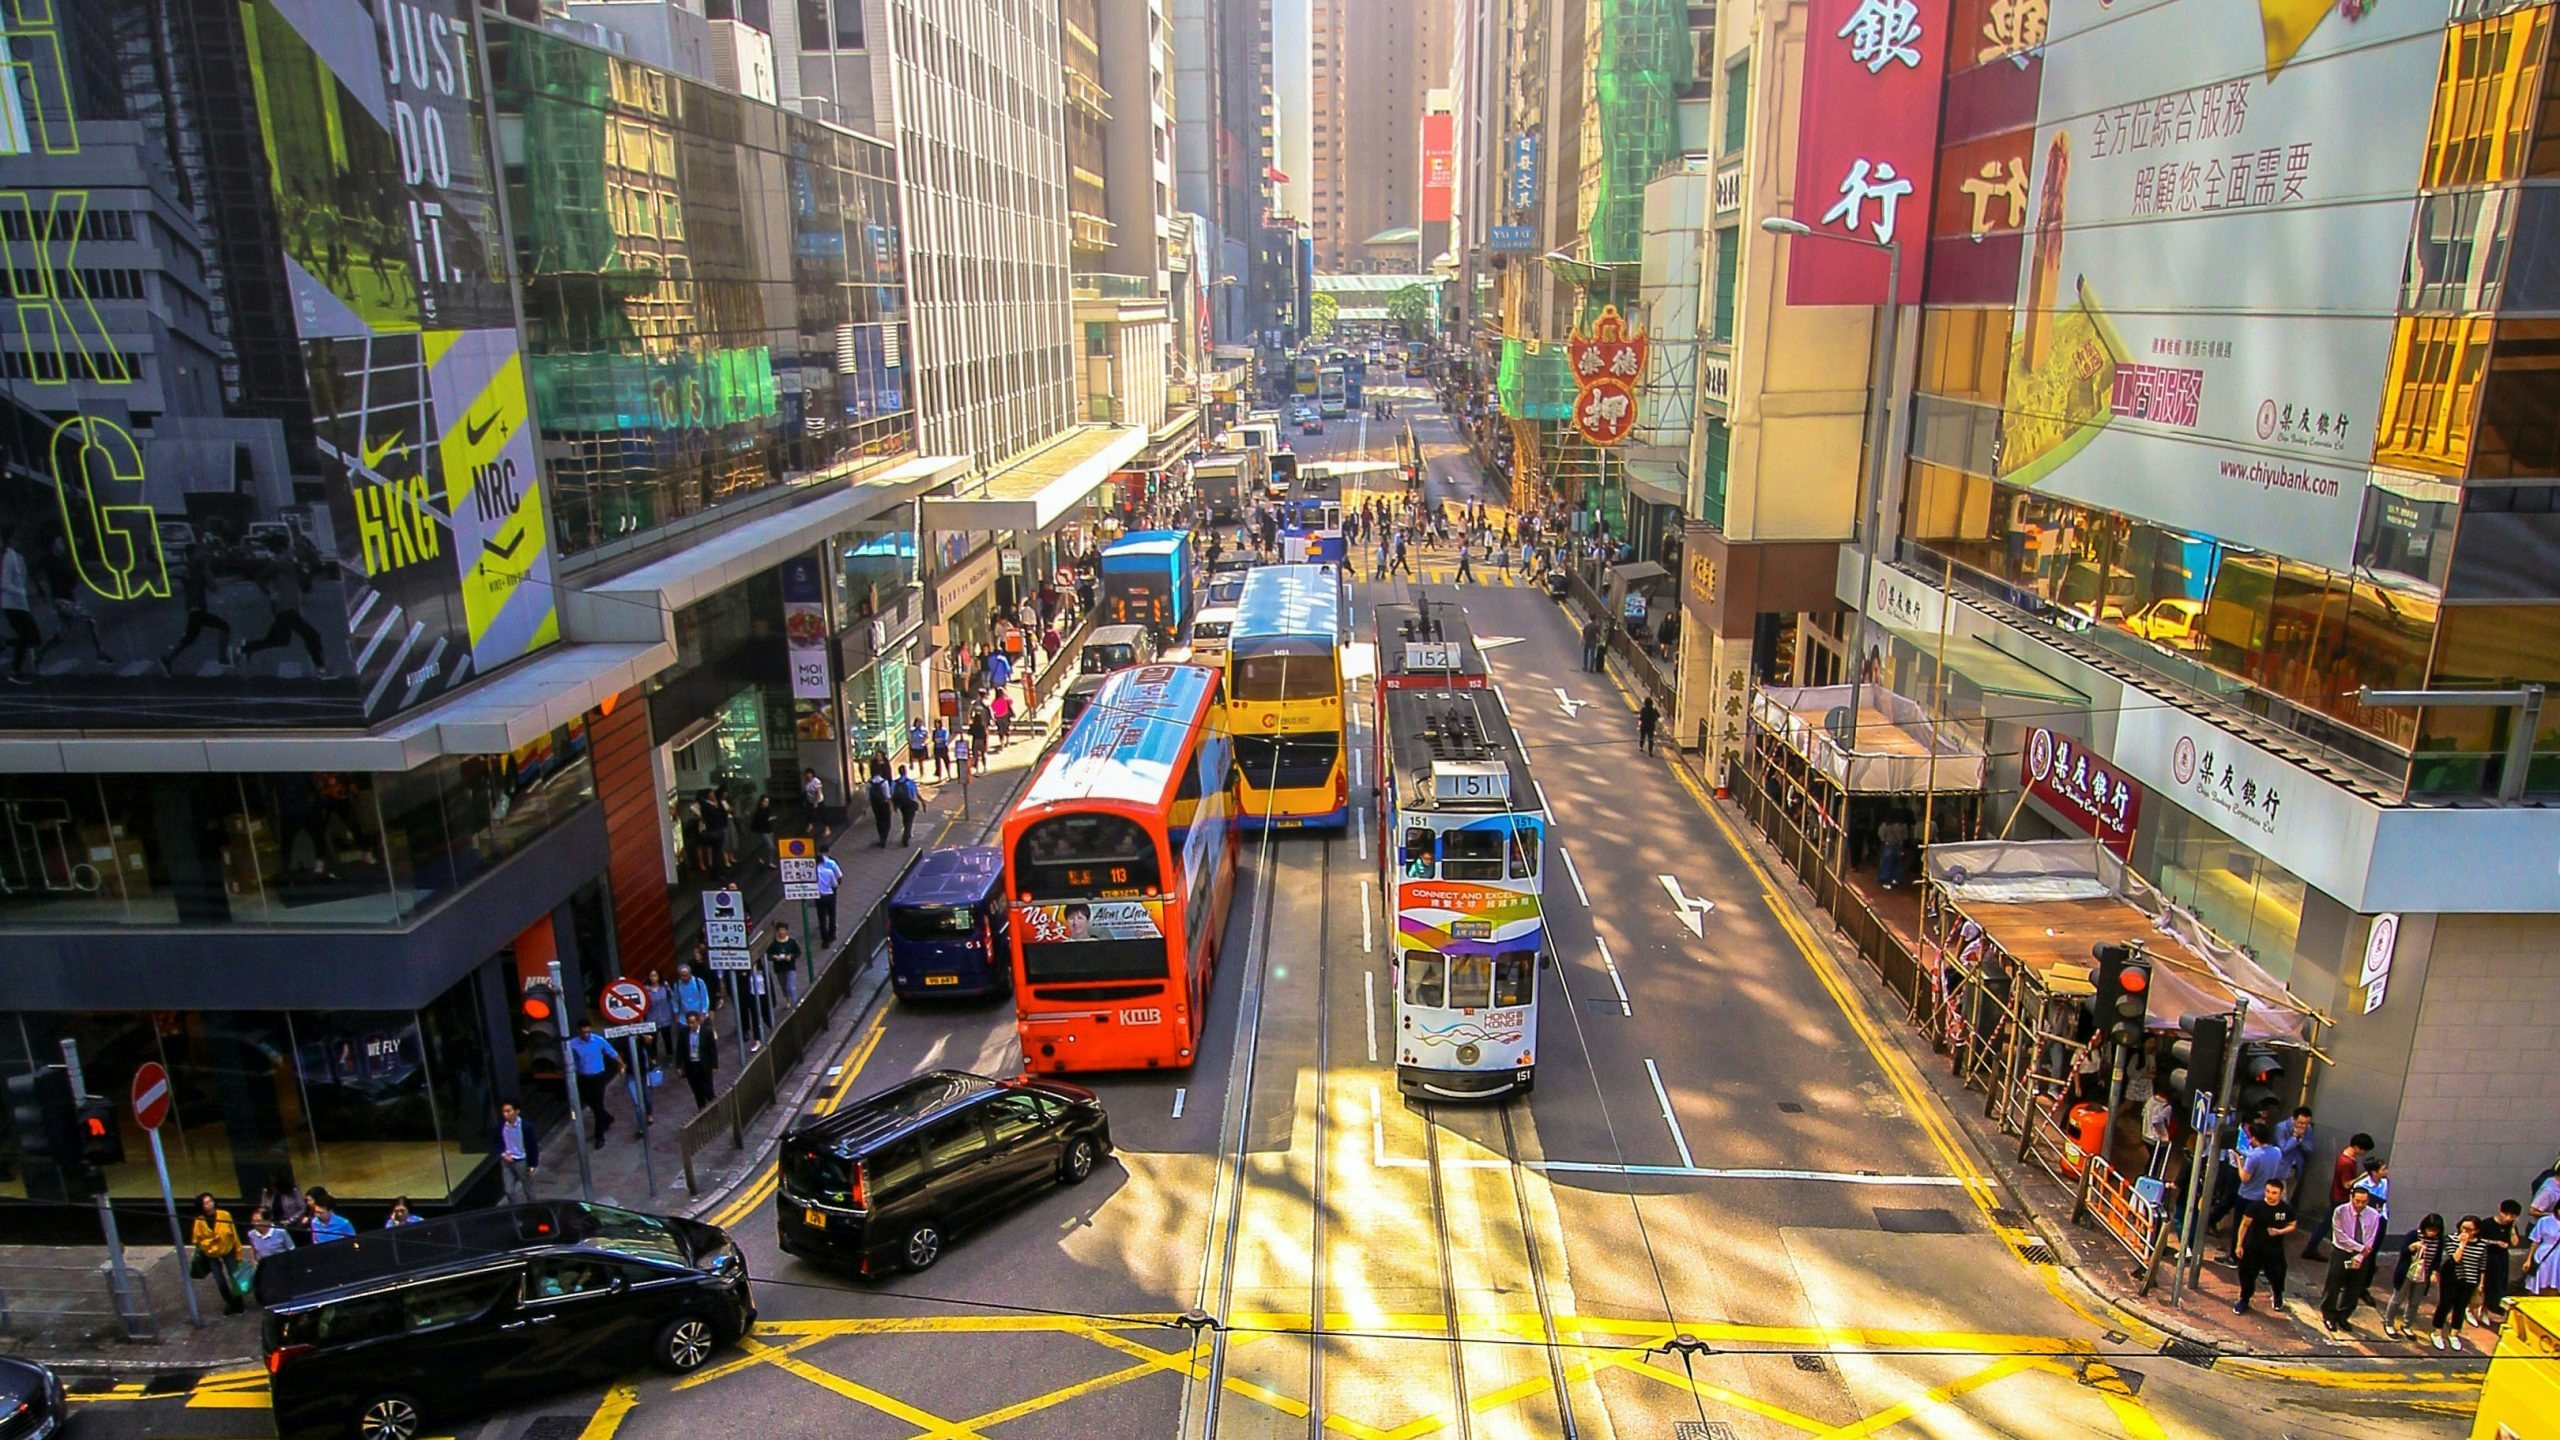 With the return of A-list luxury events and retailers, brands and insiders wonder if Hong Kong will see a retail and tourism renaissance after all. Photo: Unsplash